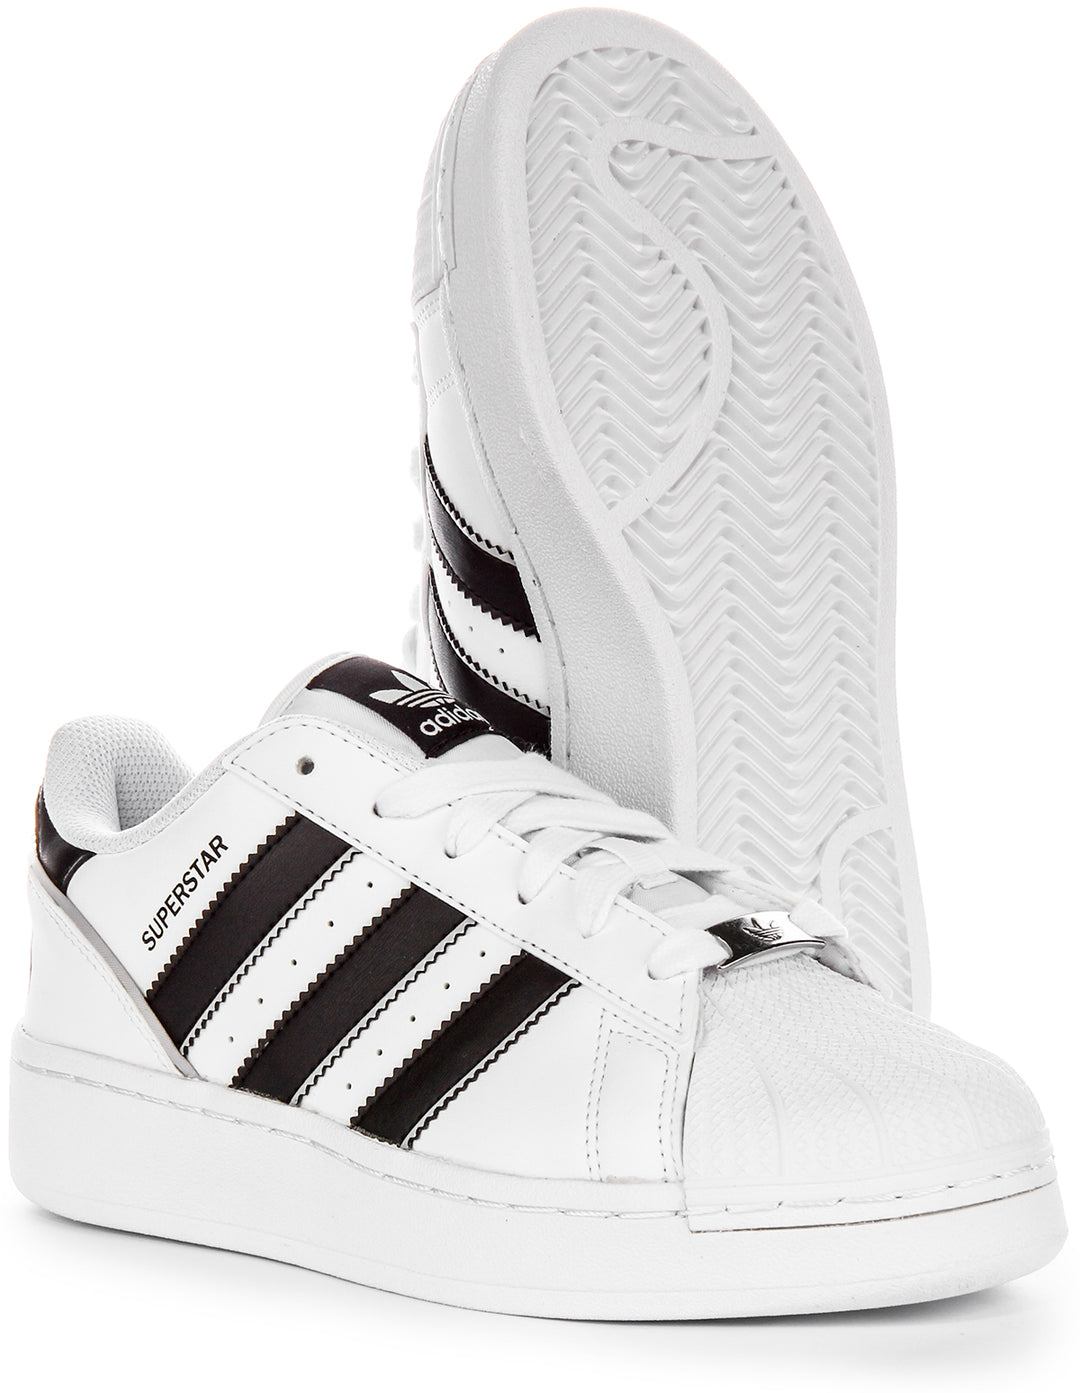 Adidas Superstar XLG In White Black For Youth